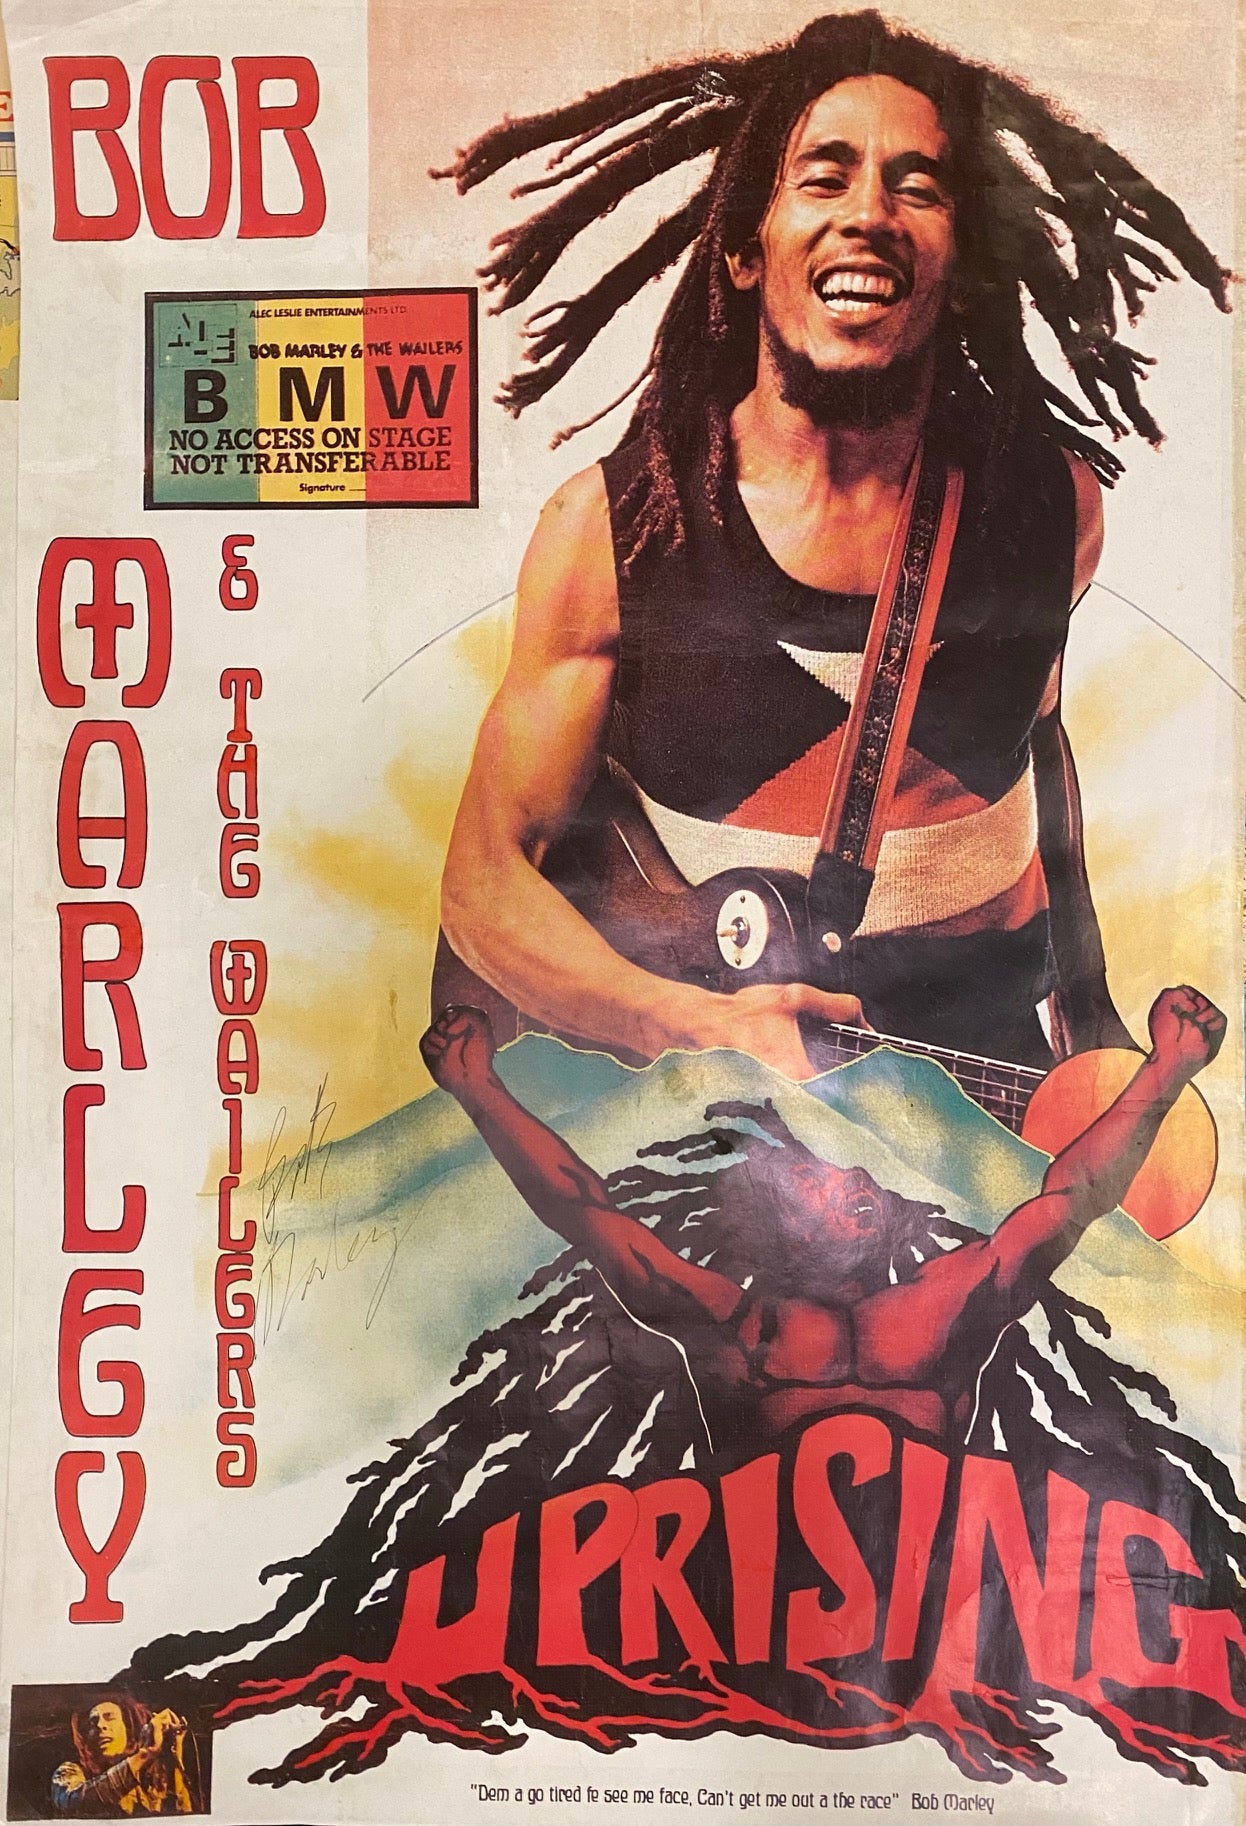 New trailer and poster for upcoming Bob Marley biopic released